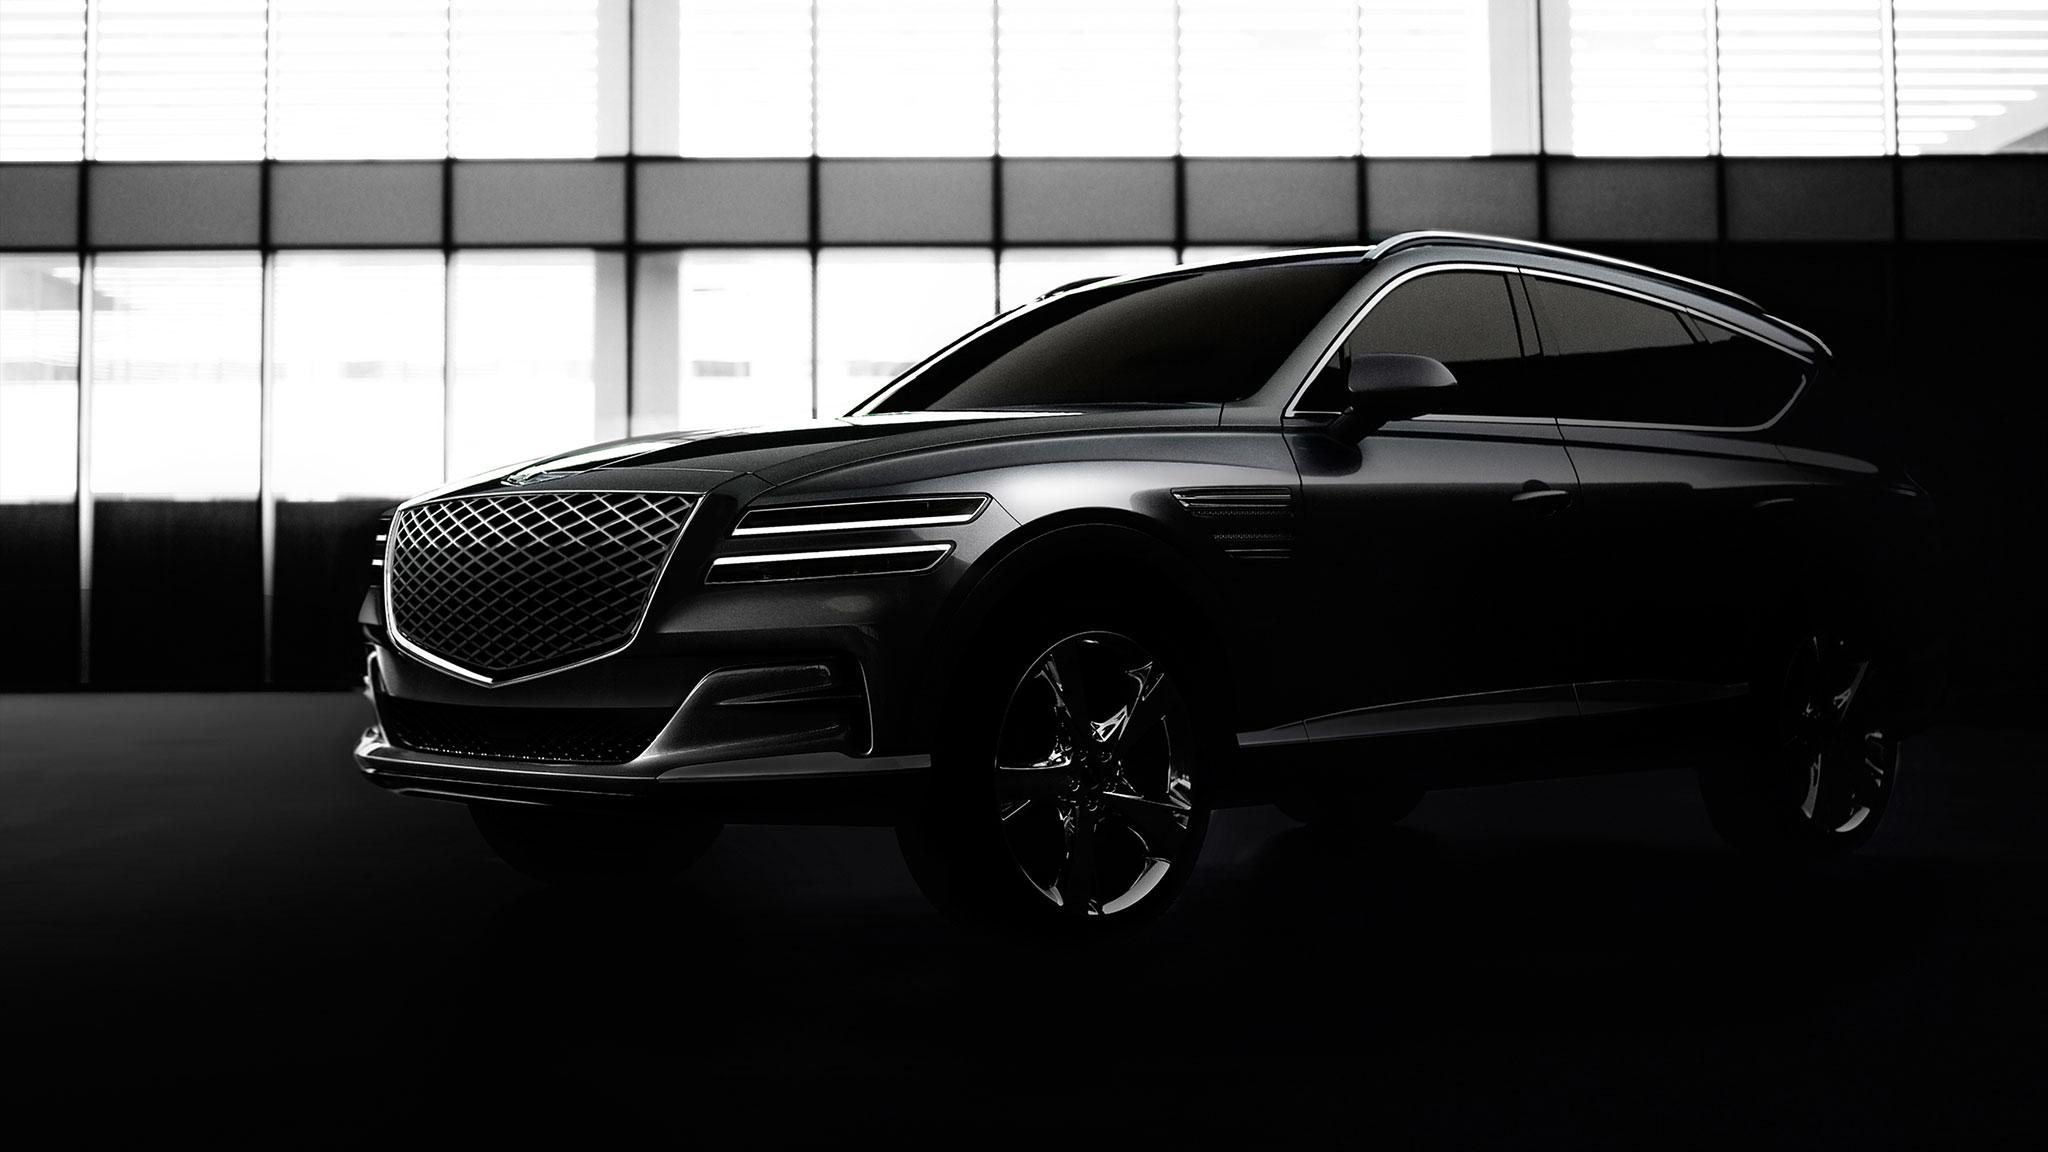 Genesis GV80 SUV: Here Are the First Picture